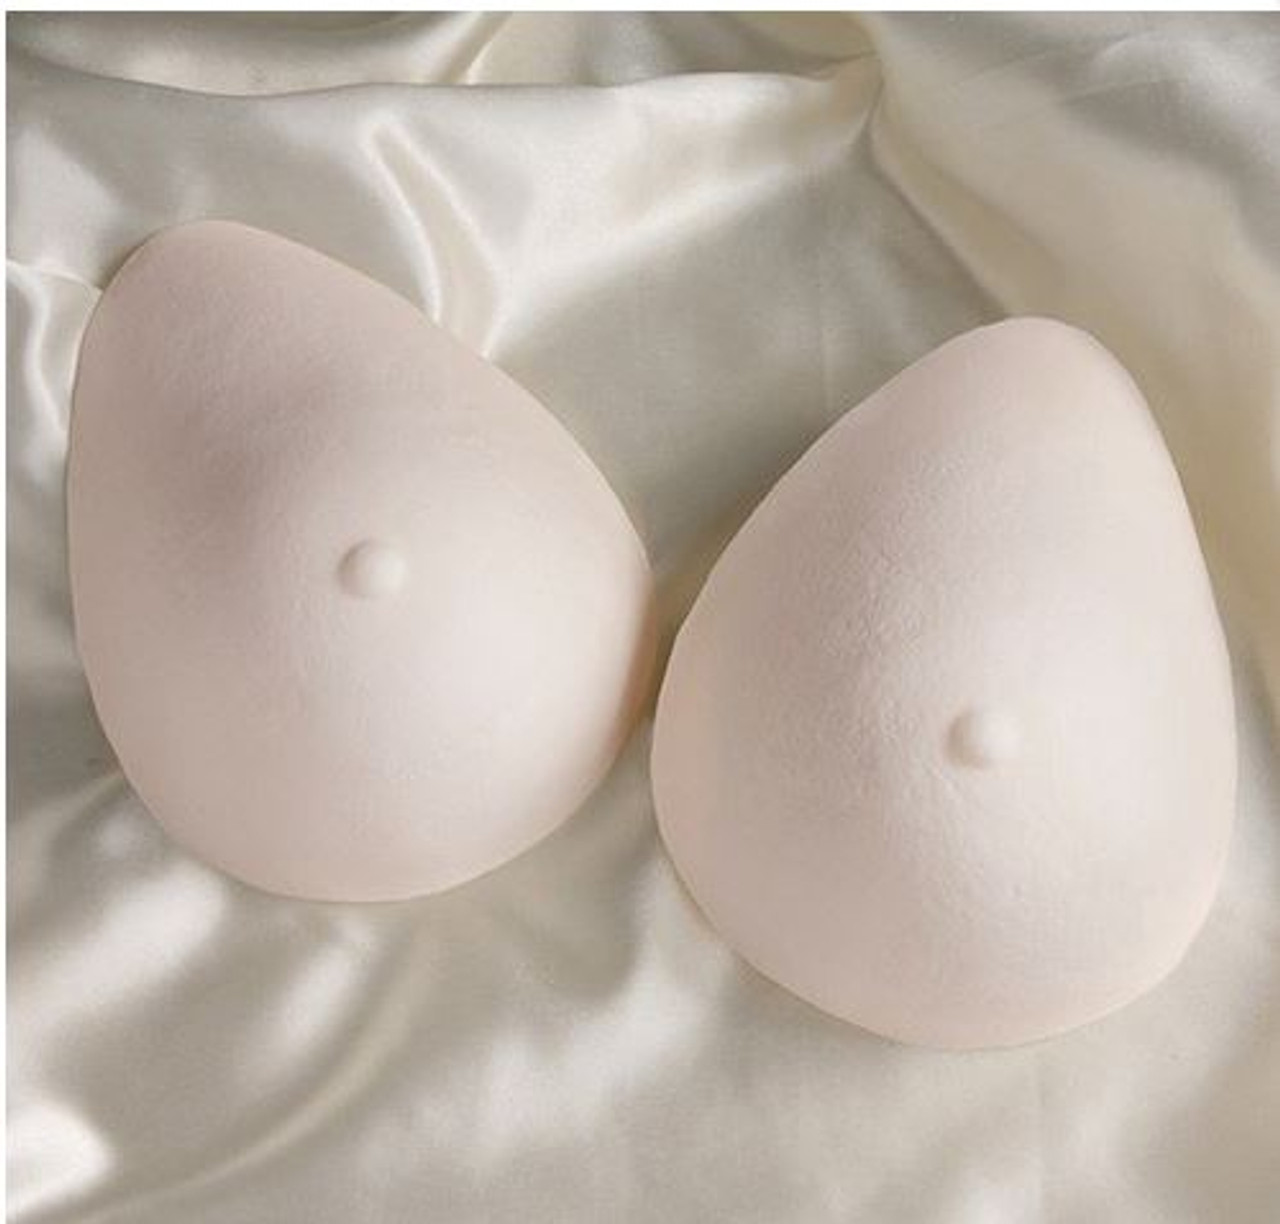 One Pair Triangle Silicone Breast Forms Mastectomy Prosthesis Bra